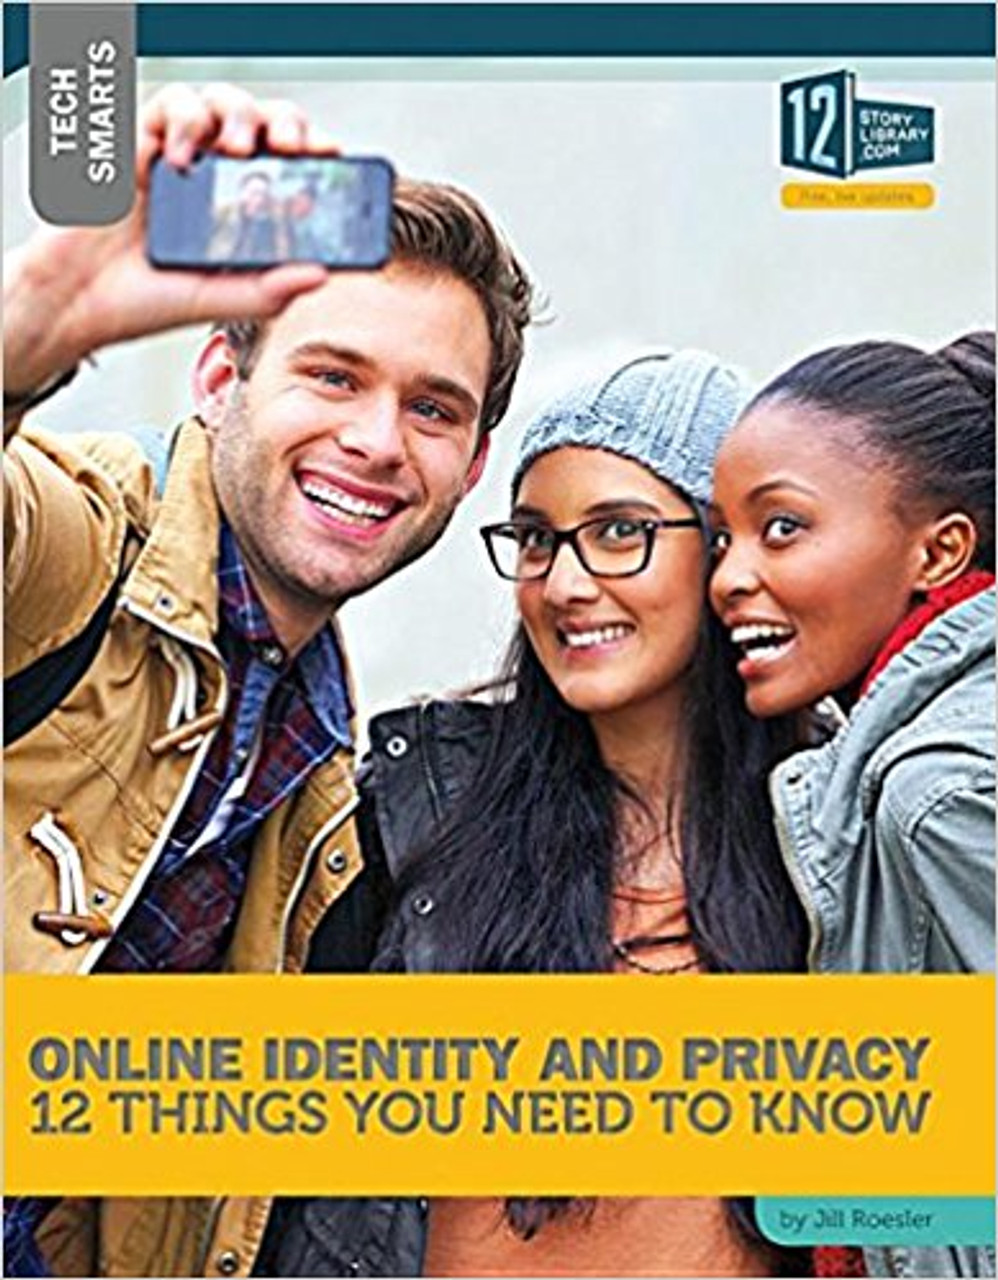 Online Identity and Privacy: 12 Things You Need to Know by Jill Roesler